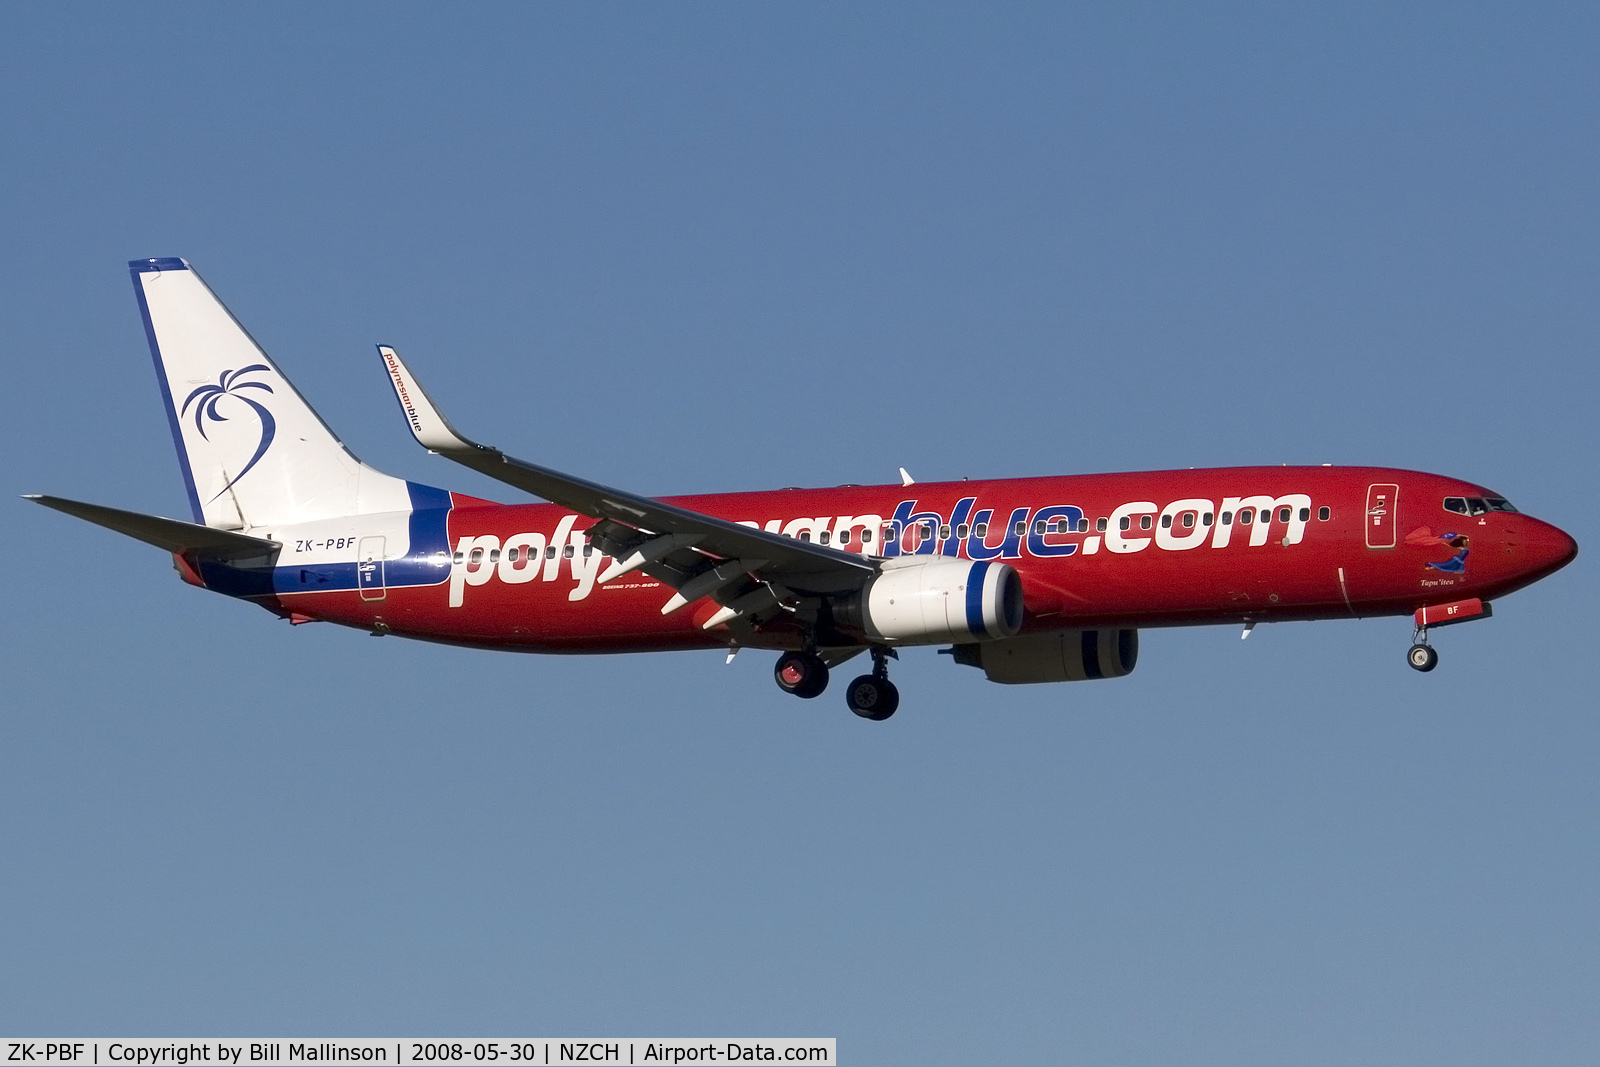 ZK-PBF, 2004 Boeing 737-8FE C/N 33799, finals to 20